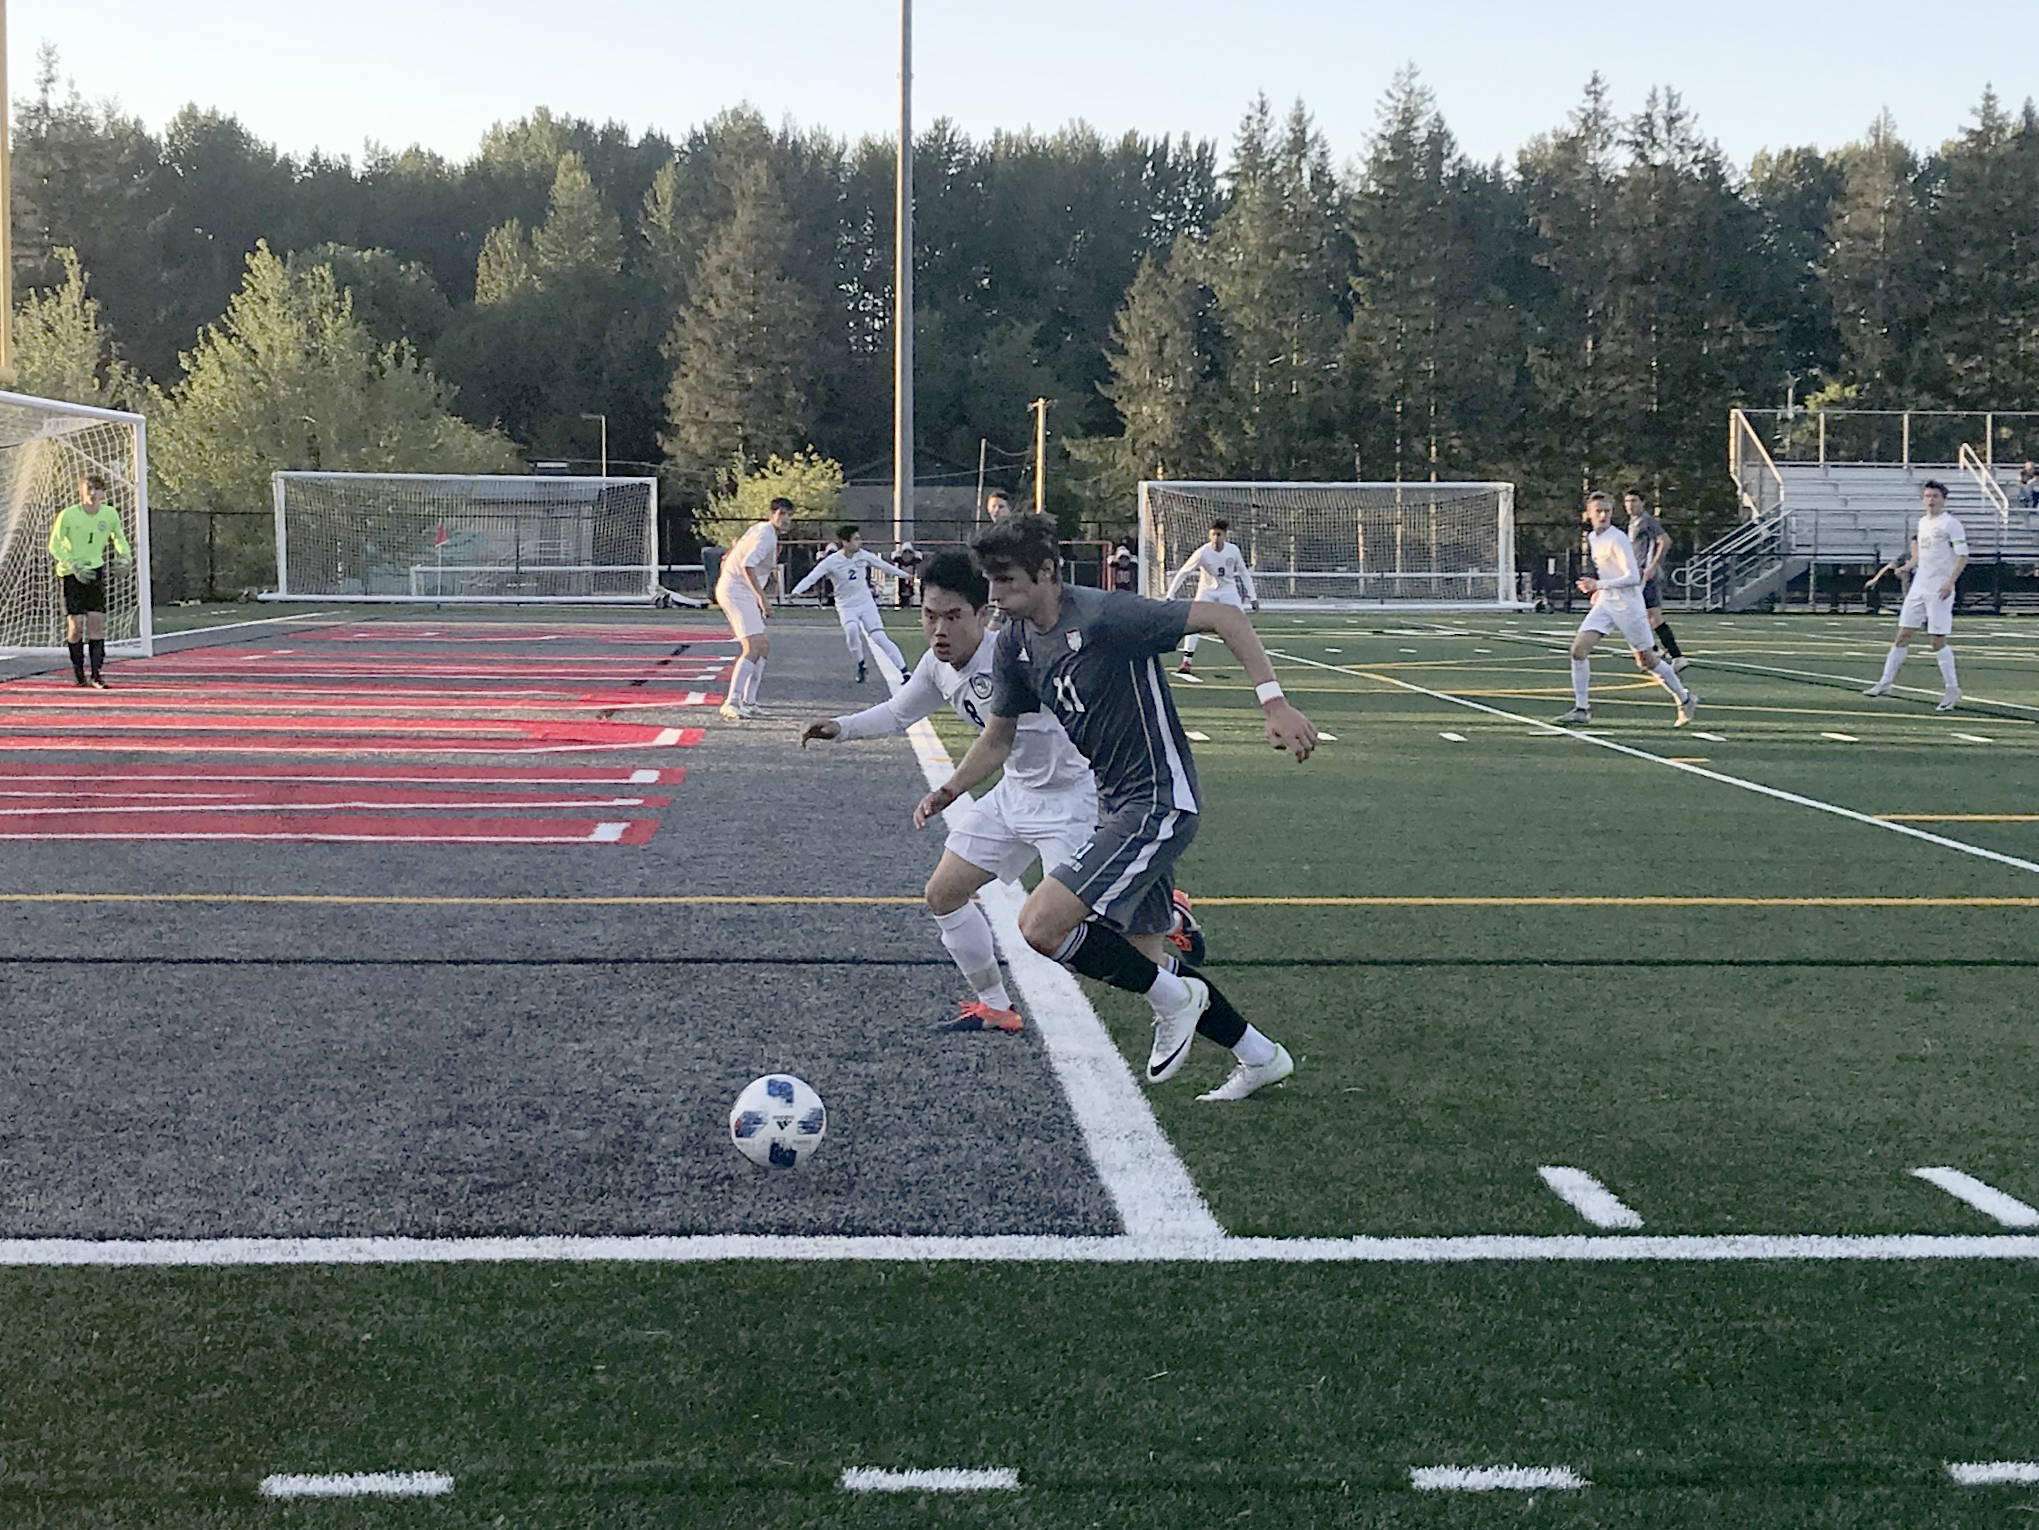 Mount Si Wildcats senior Drew Harris chases the ball while being defended by Jackson’s Minhyok Kim in the first half of play. Jackson defeated Mount Si in an overtime penalty kick shootout (6-5) en route to a 3-2 victory in the Wes-King 4A boys district soccer tournament championship game on May 9 at Mount Si High School in Snoqualmie. Shaun Scott/staff photo